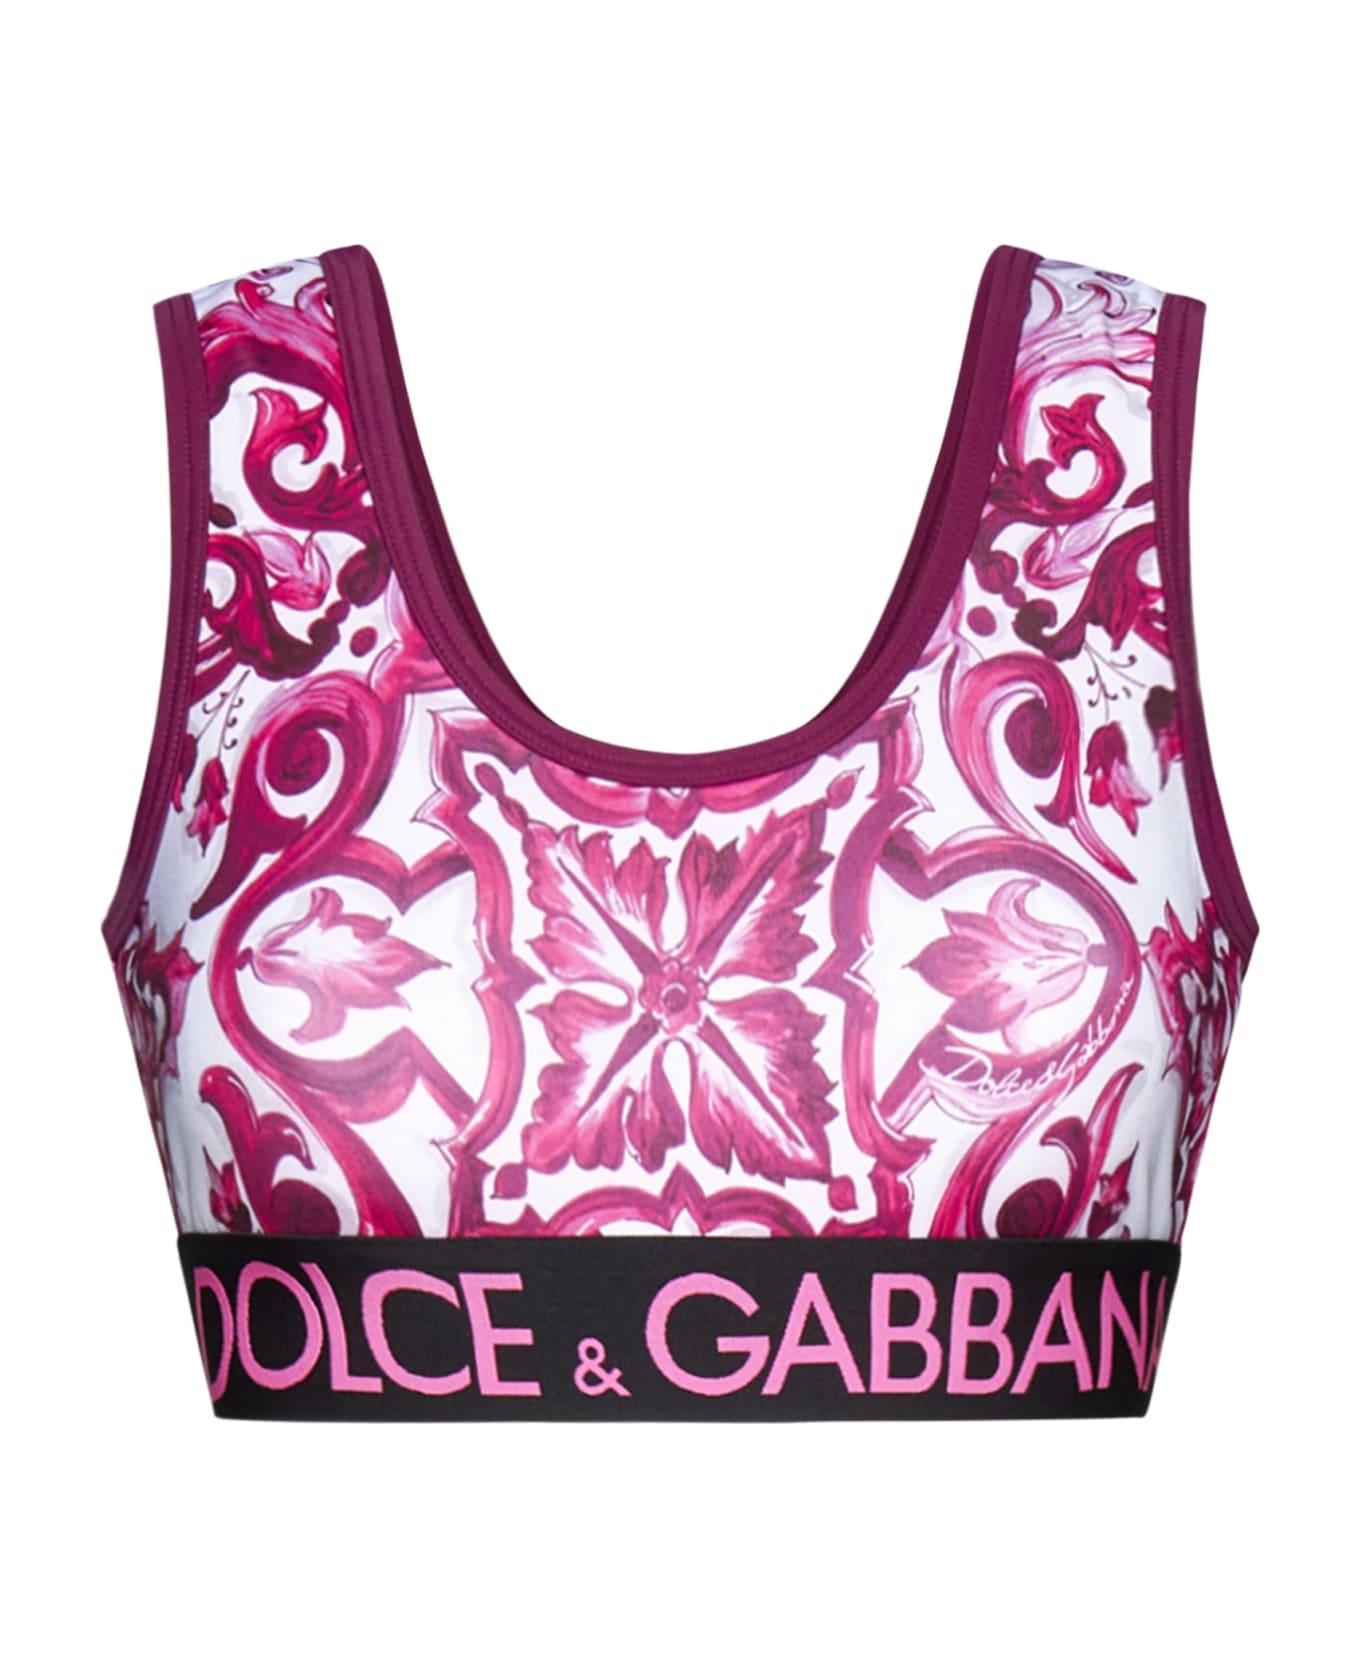 Dolce & Gabbana Technical Jersey Top - Dolce & Gabbana cropped double-breasted jacket